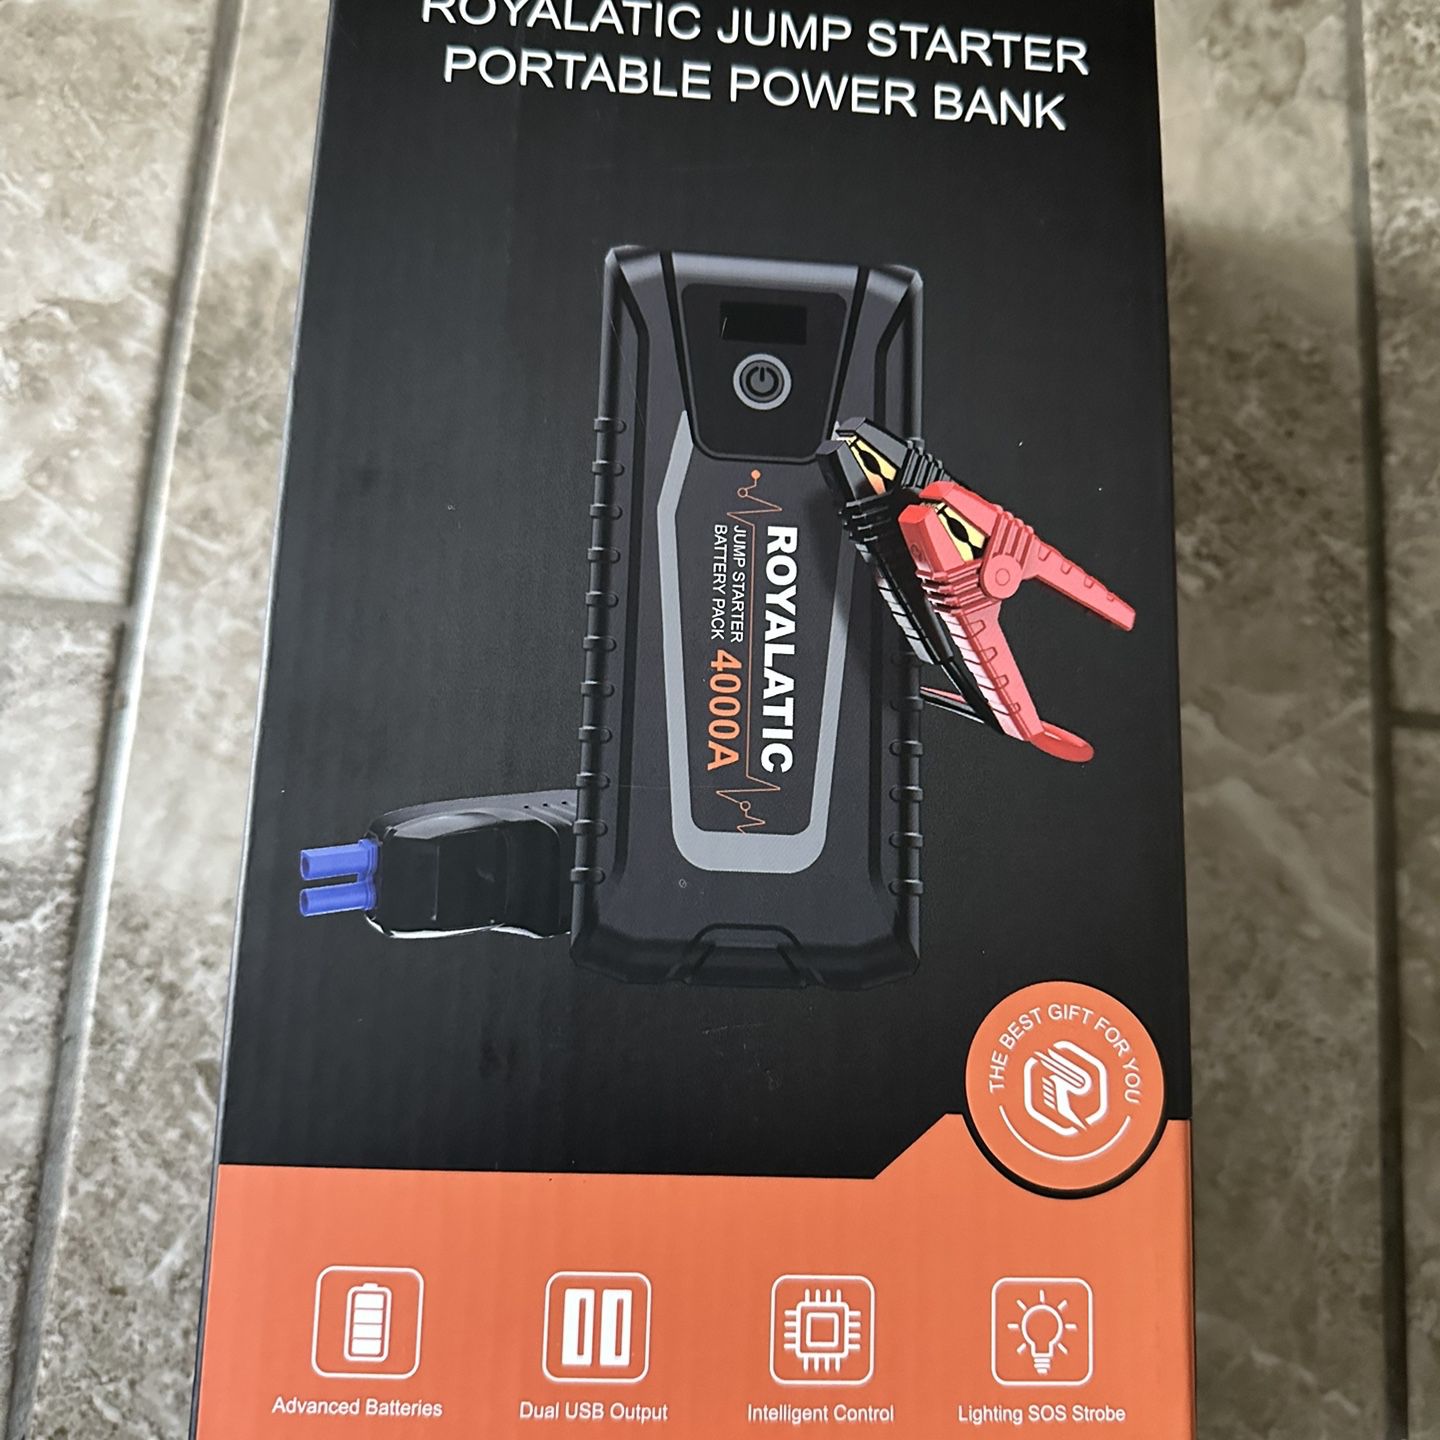  Car Battery Jump Starter Portable 4000A 26800mAh for All Gas or  Up to 10L Diesel Engines, Royalatic 12V Jump Battery Charger Pack Box with  Jumper Cables, Fast Charging, Smart LCD Display